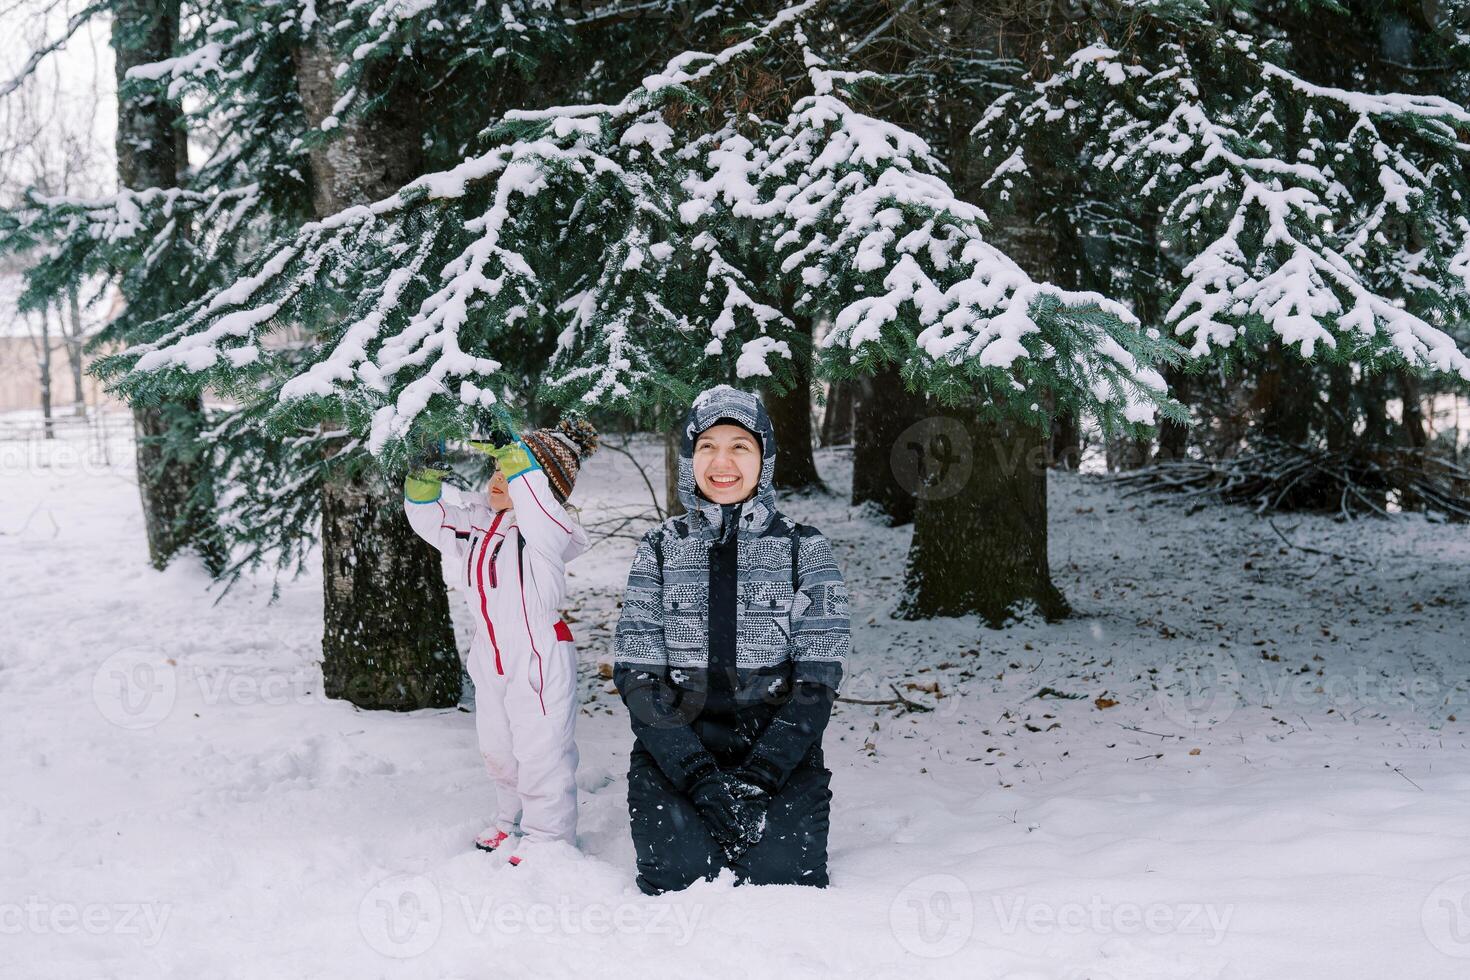 Smiling mother in a ski suit sits on her knees in the snow near a small child standing near a snow-covered pine tree photo